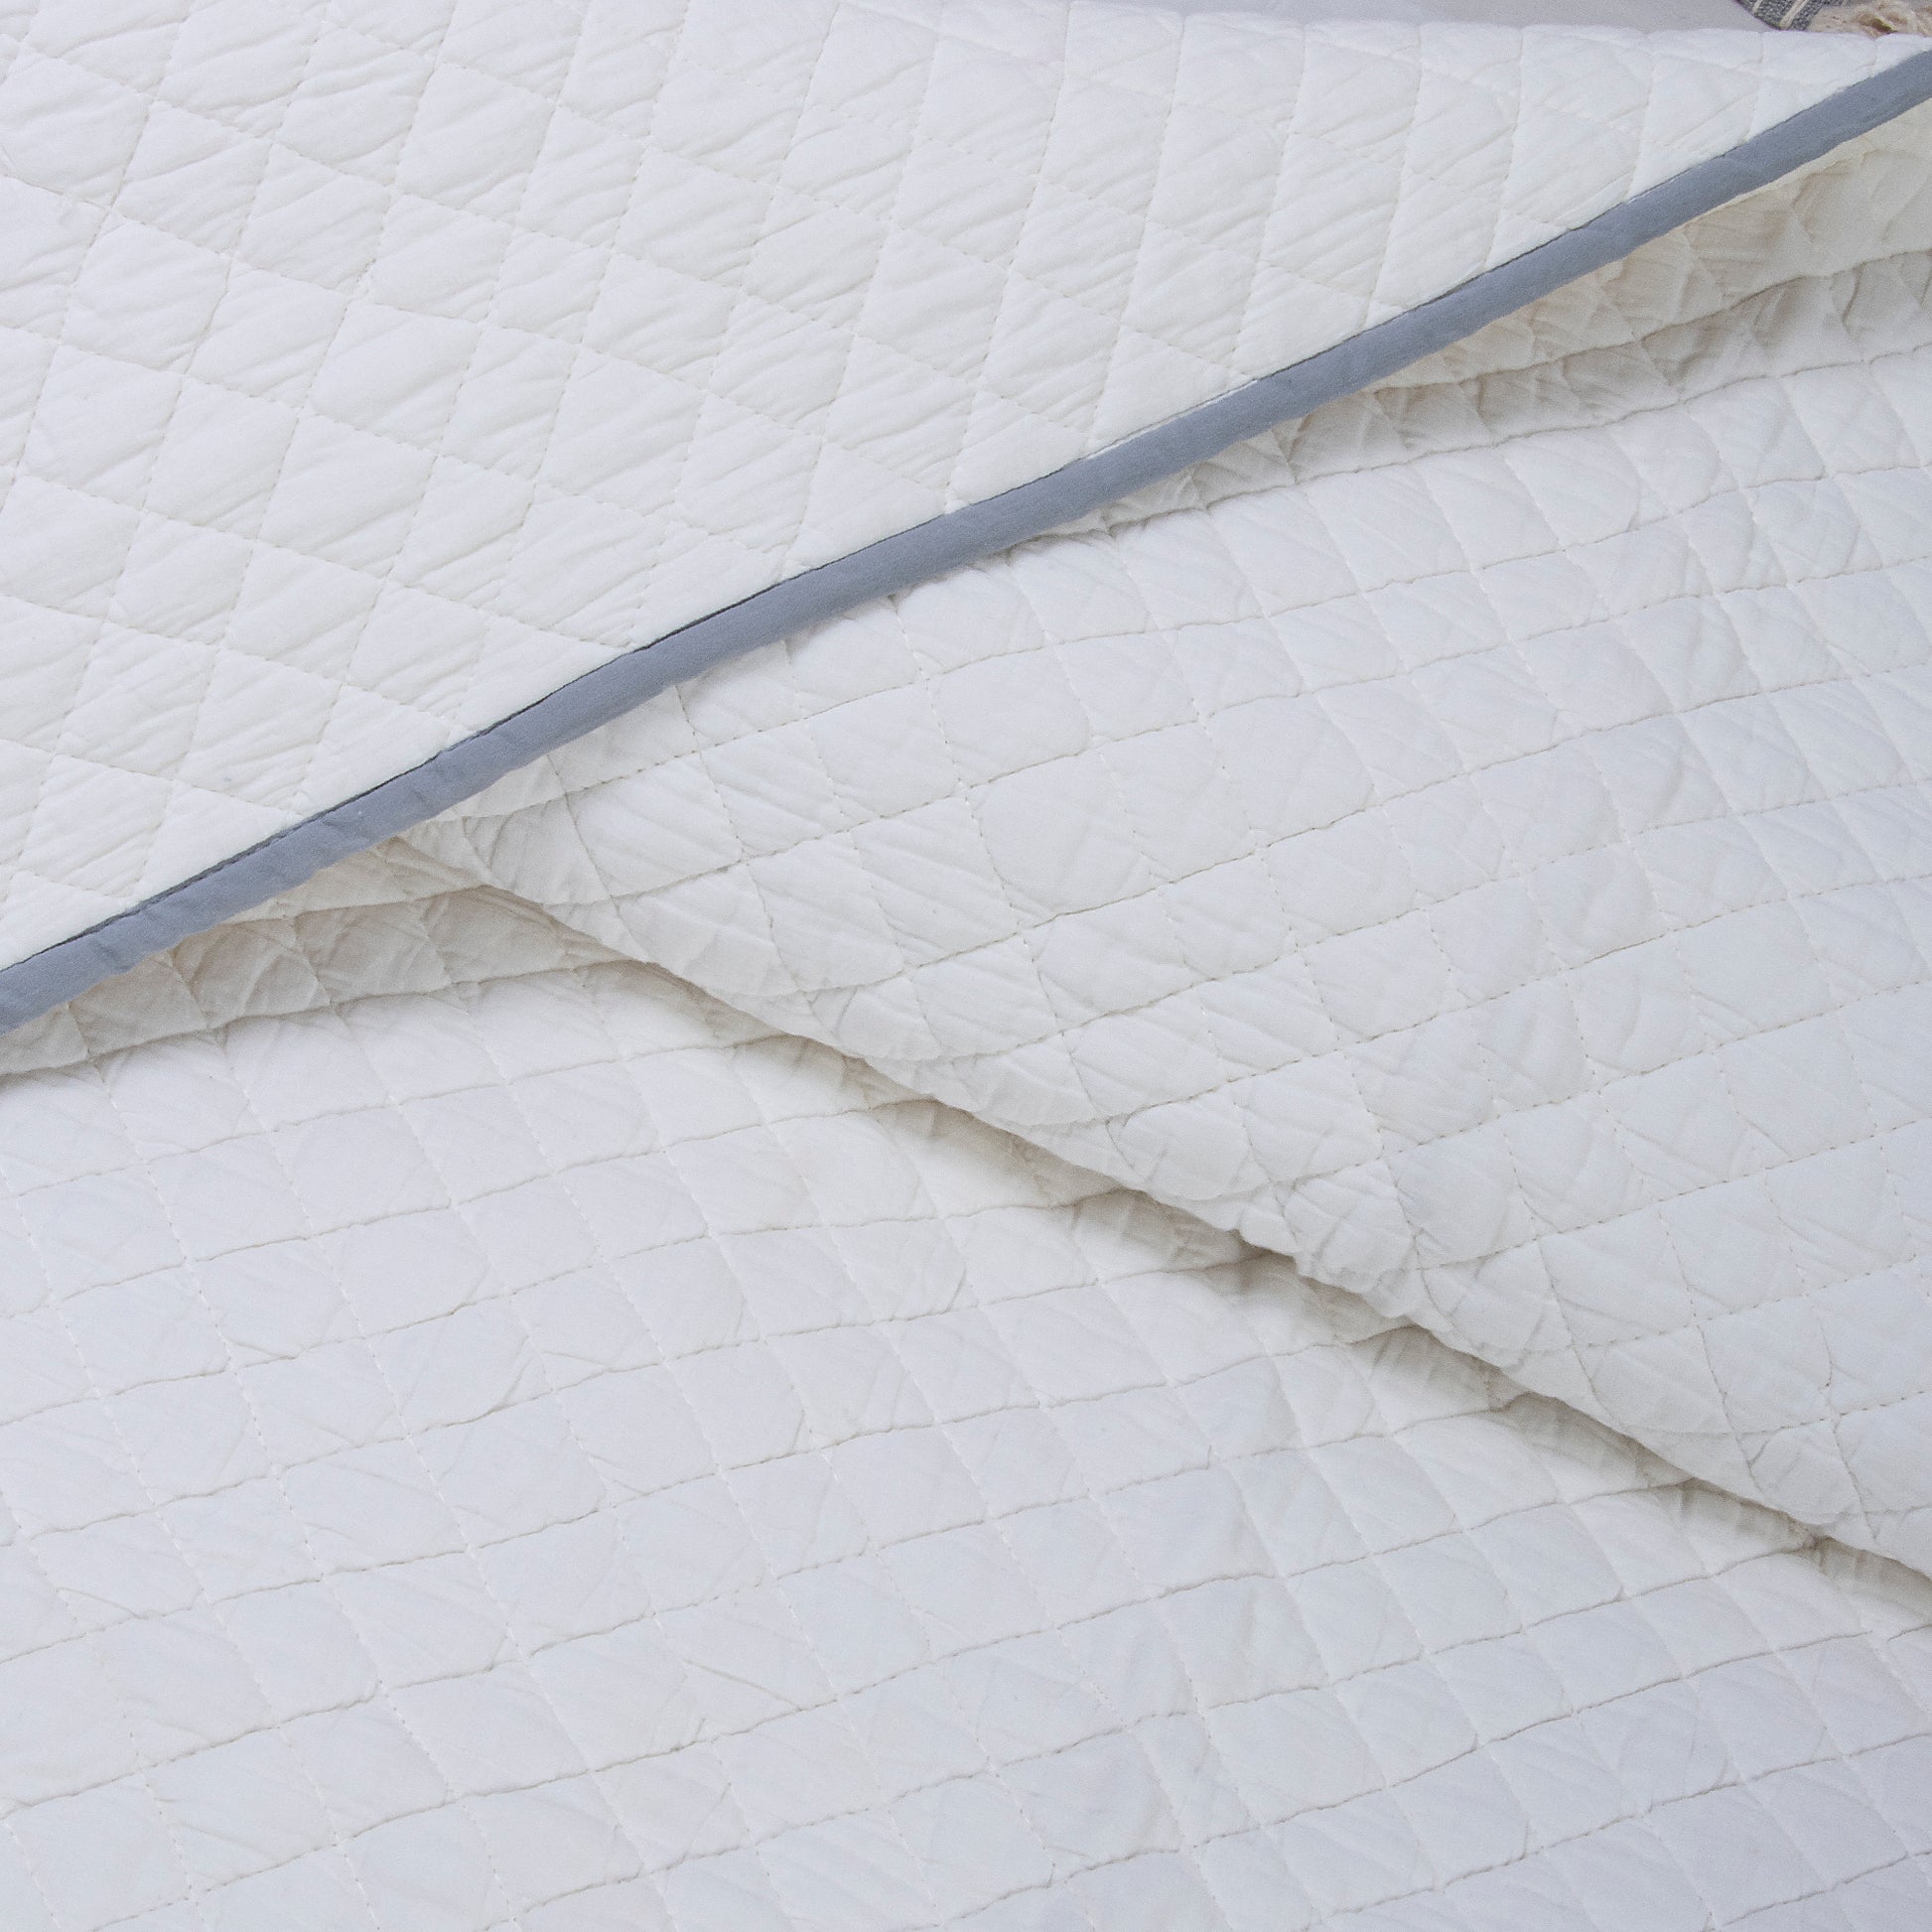 pure cotton white solid jaipuri bed covers quilt online